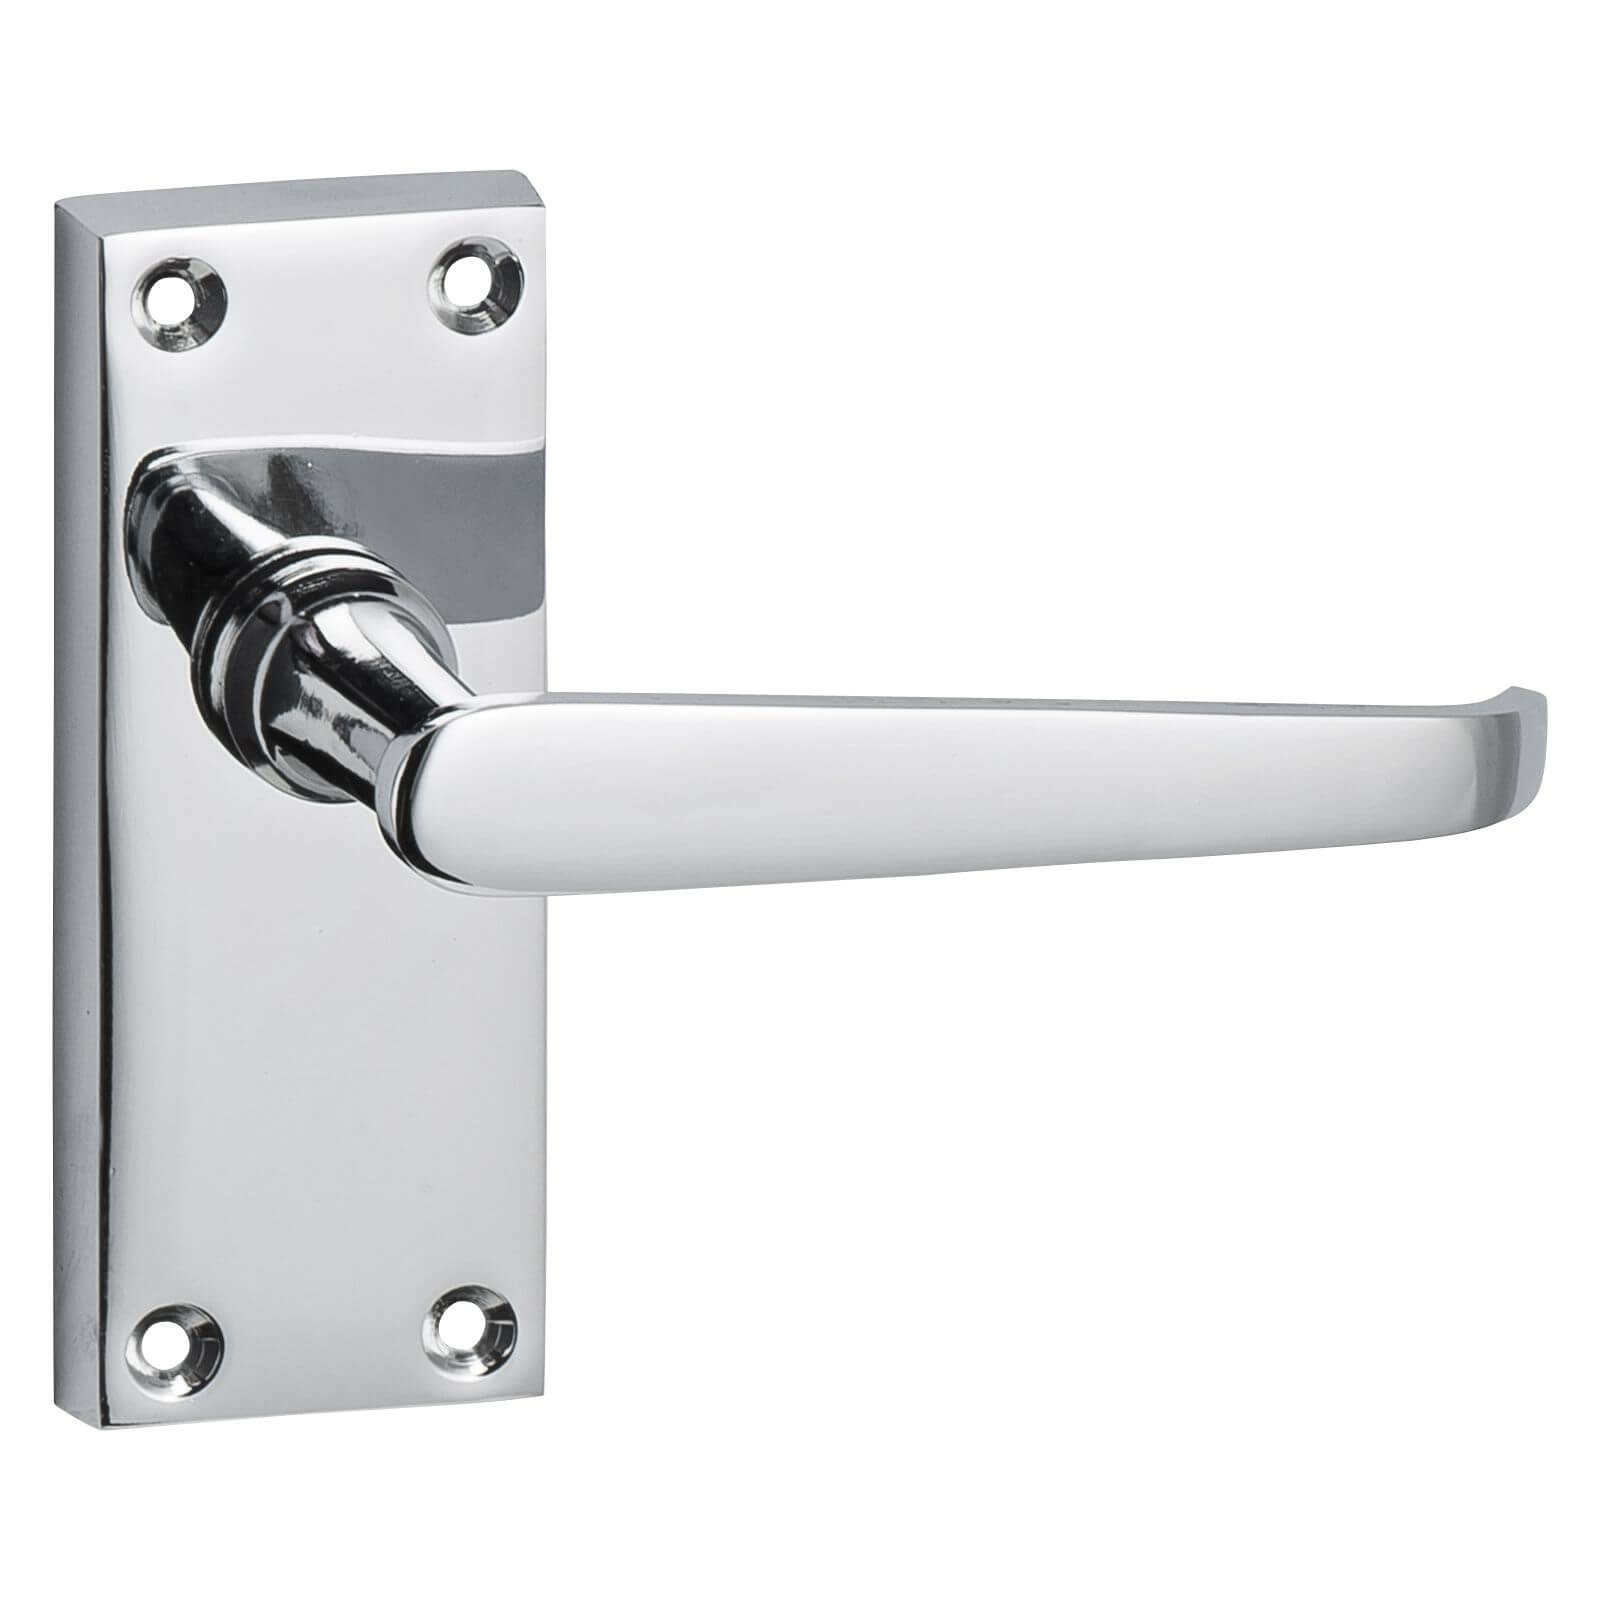 Victorian Lever Latch Door Handle - Polished Chrome - 2 pack